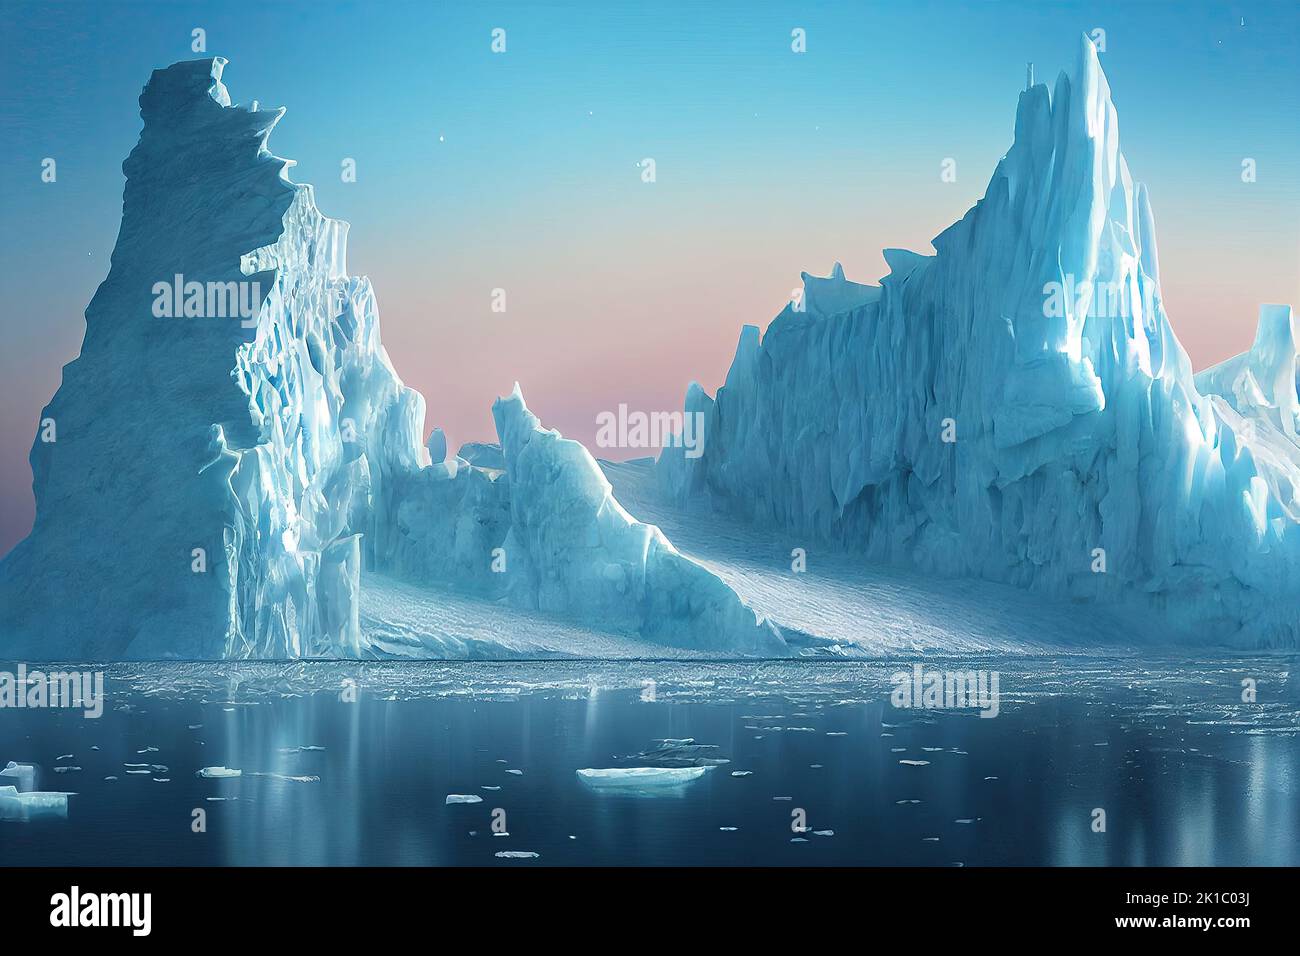 Iceberg floating in the arctic ocean. Icebergs melt due to climate change and melting glaciers at dawn. 3D illustration and digital painting. Stock Photo